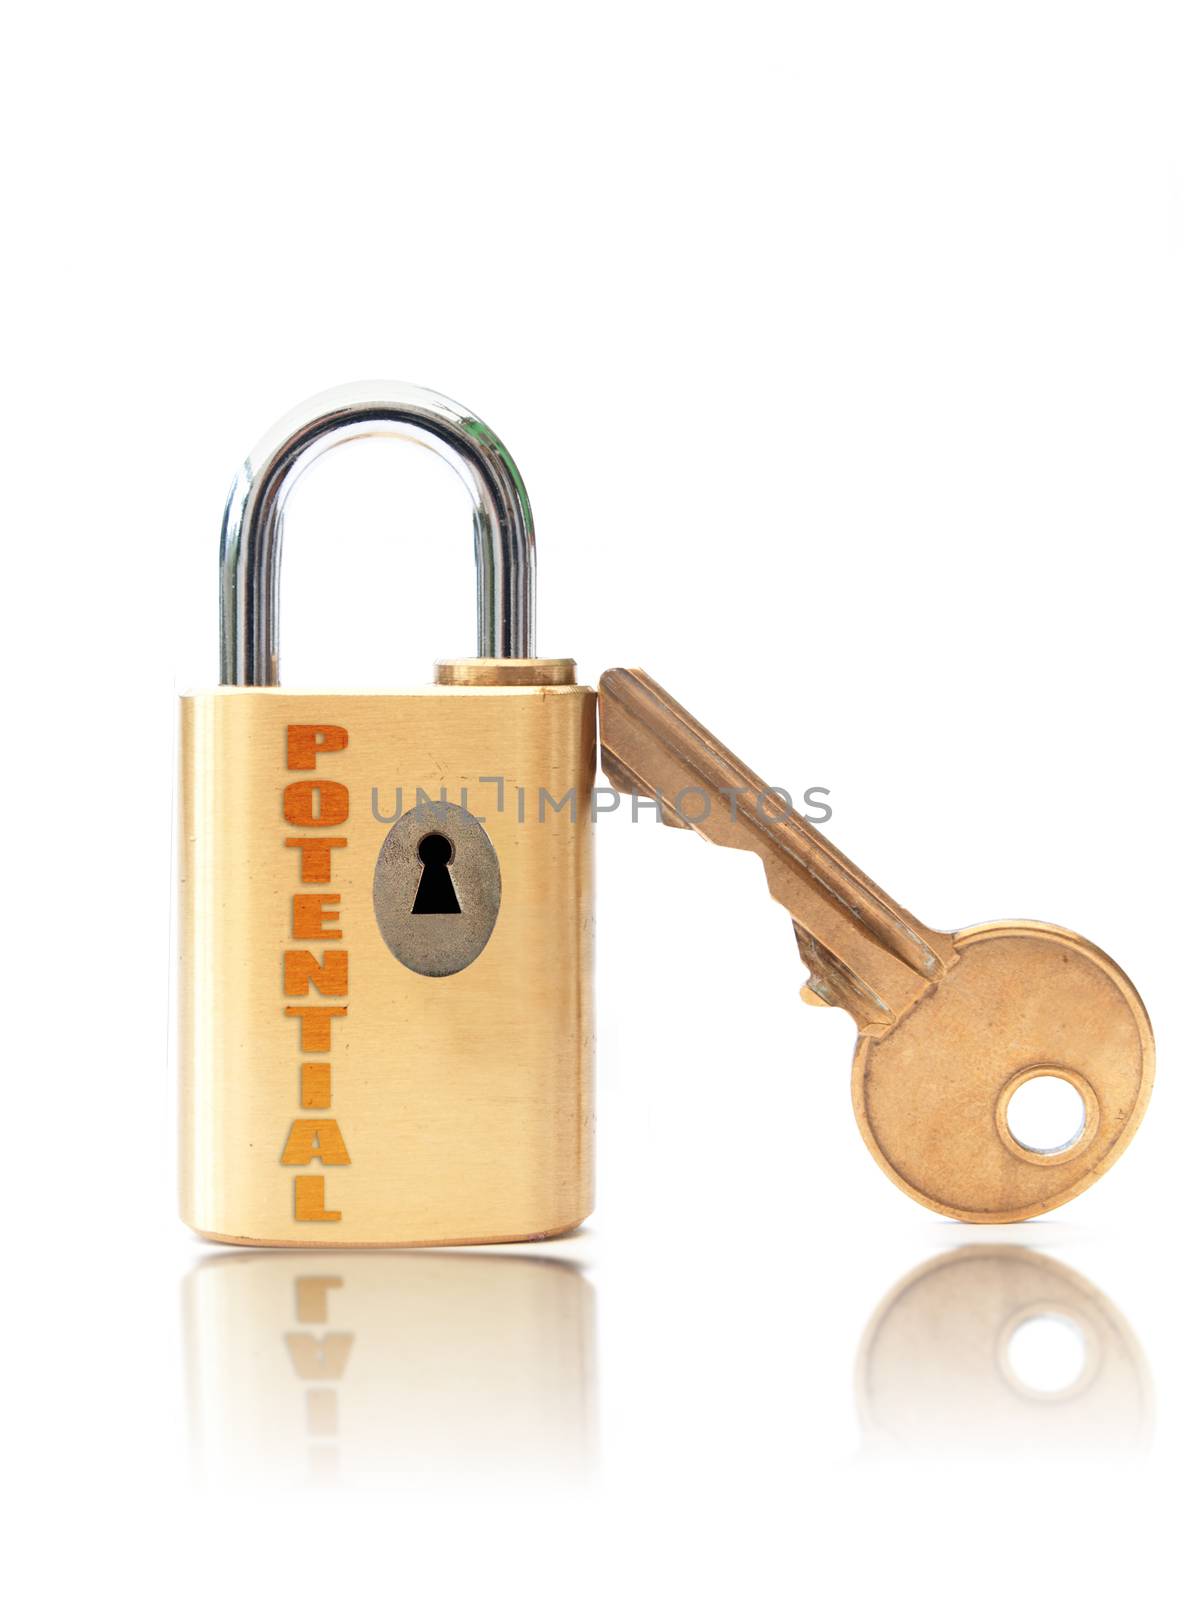 Padlock keyhole labeled with potential over a white background